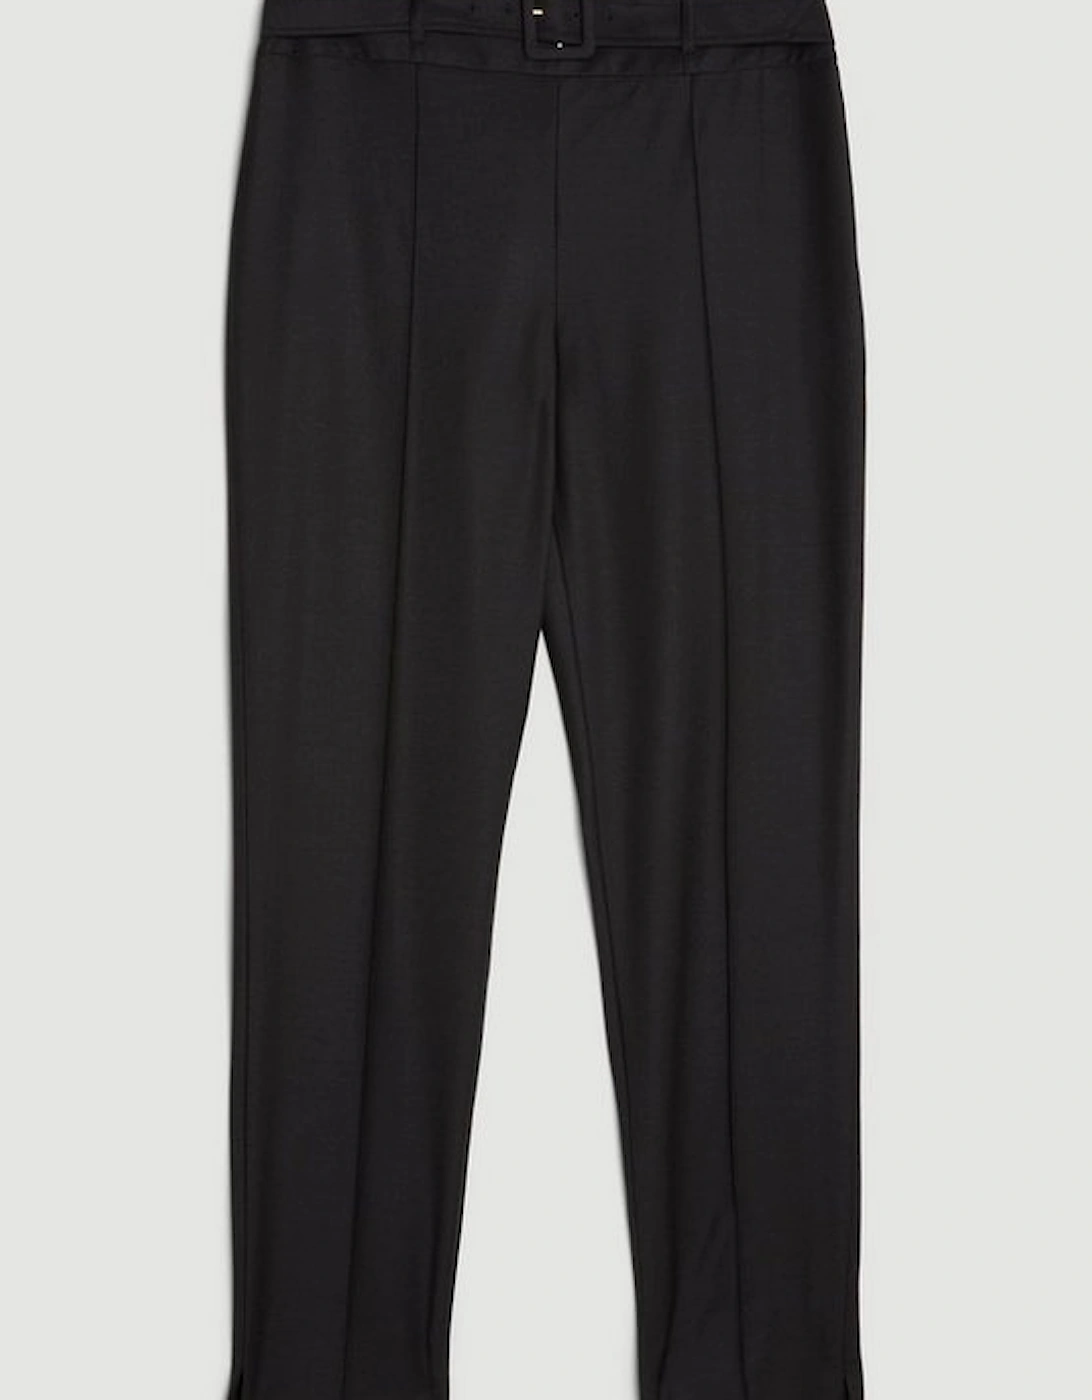 The Founder Tailored Wool Blend High Waist Belted Slim Leg Trousers